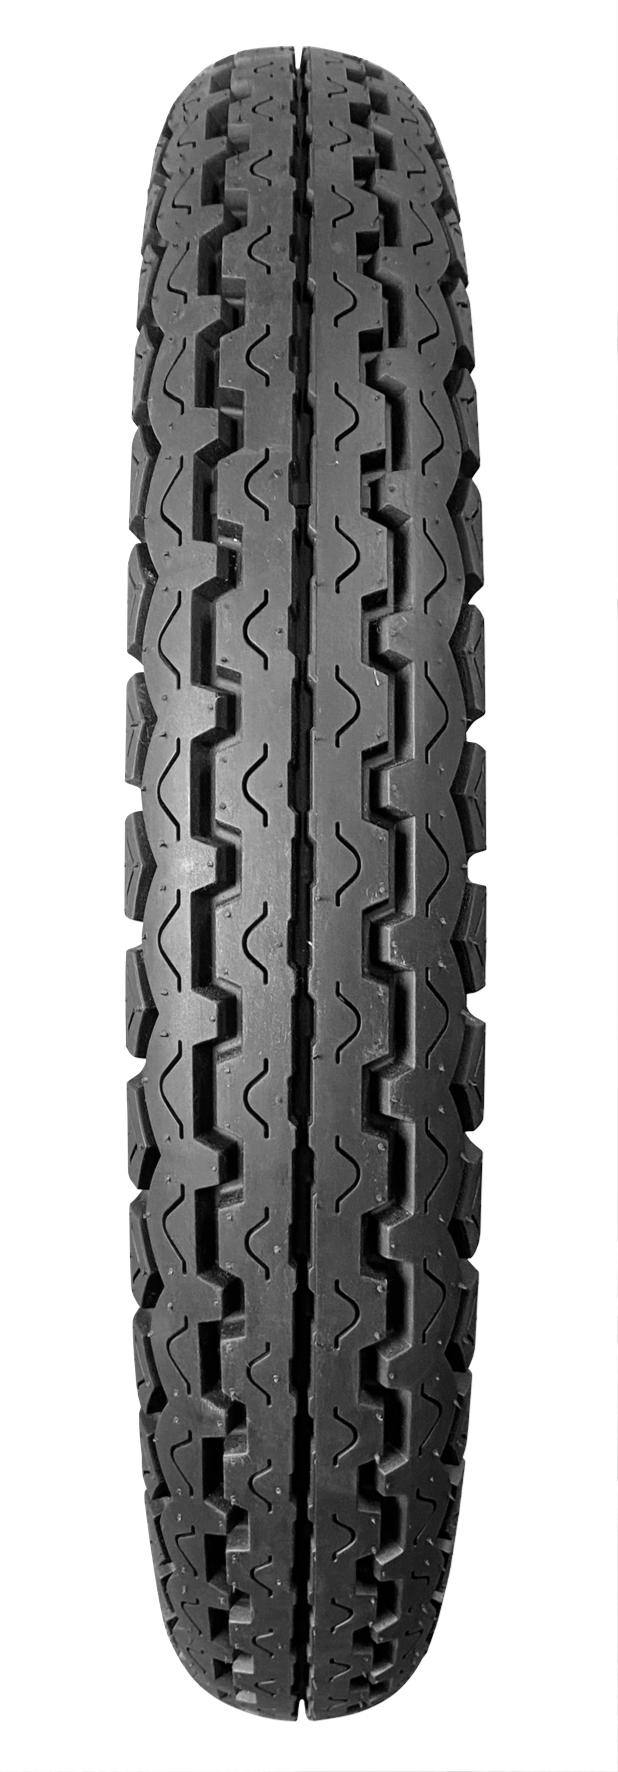 Classic Motorcycle 4.10 X 18 Rear Tyres K81 Tread Pattern Fully Compliant E11